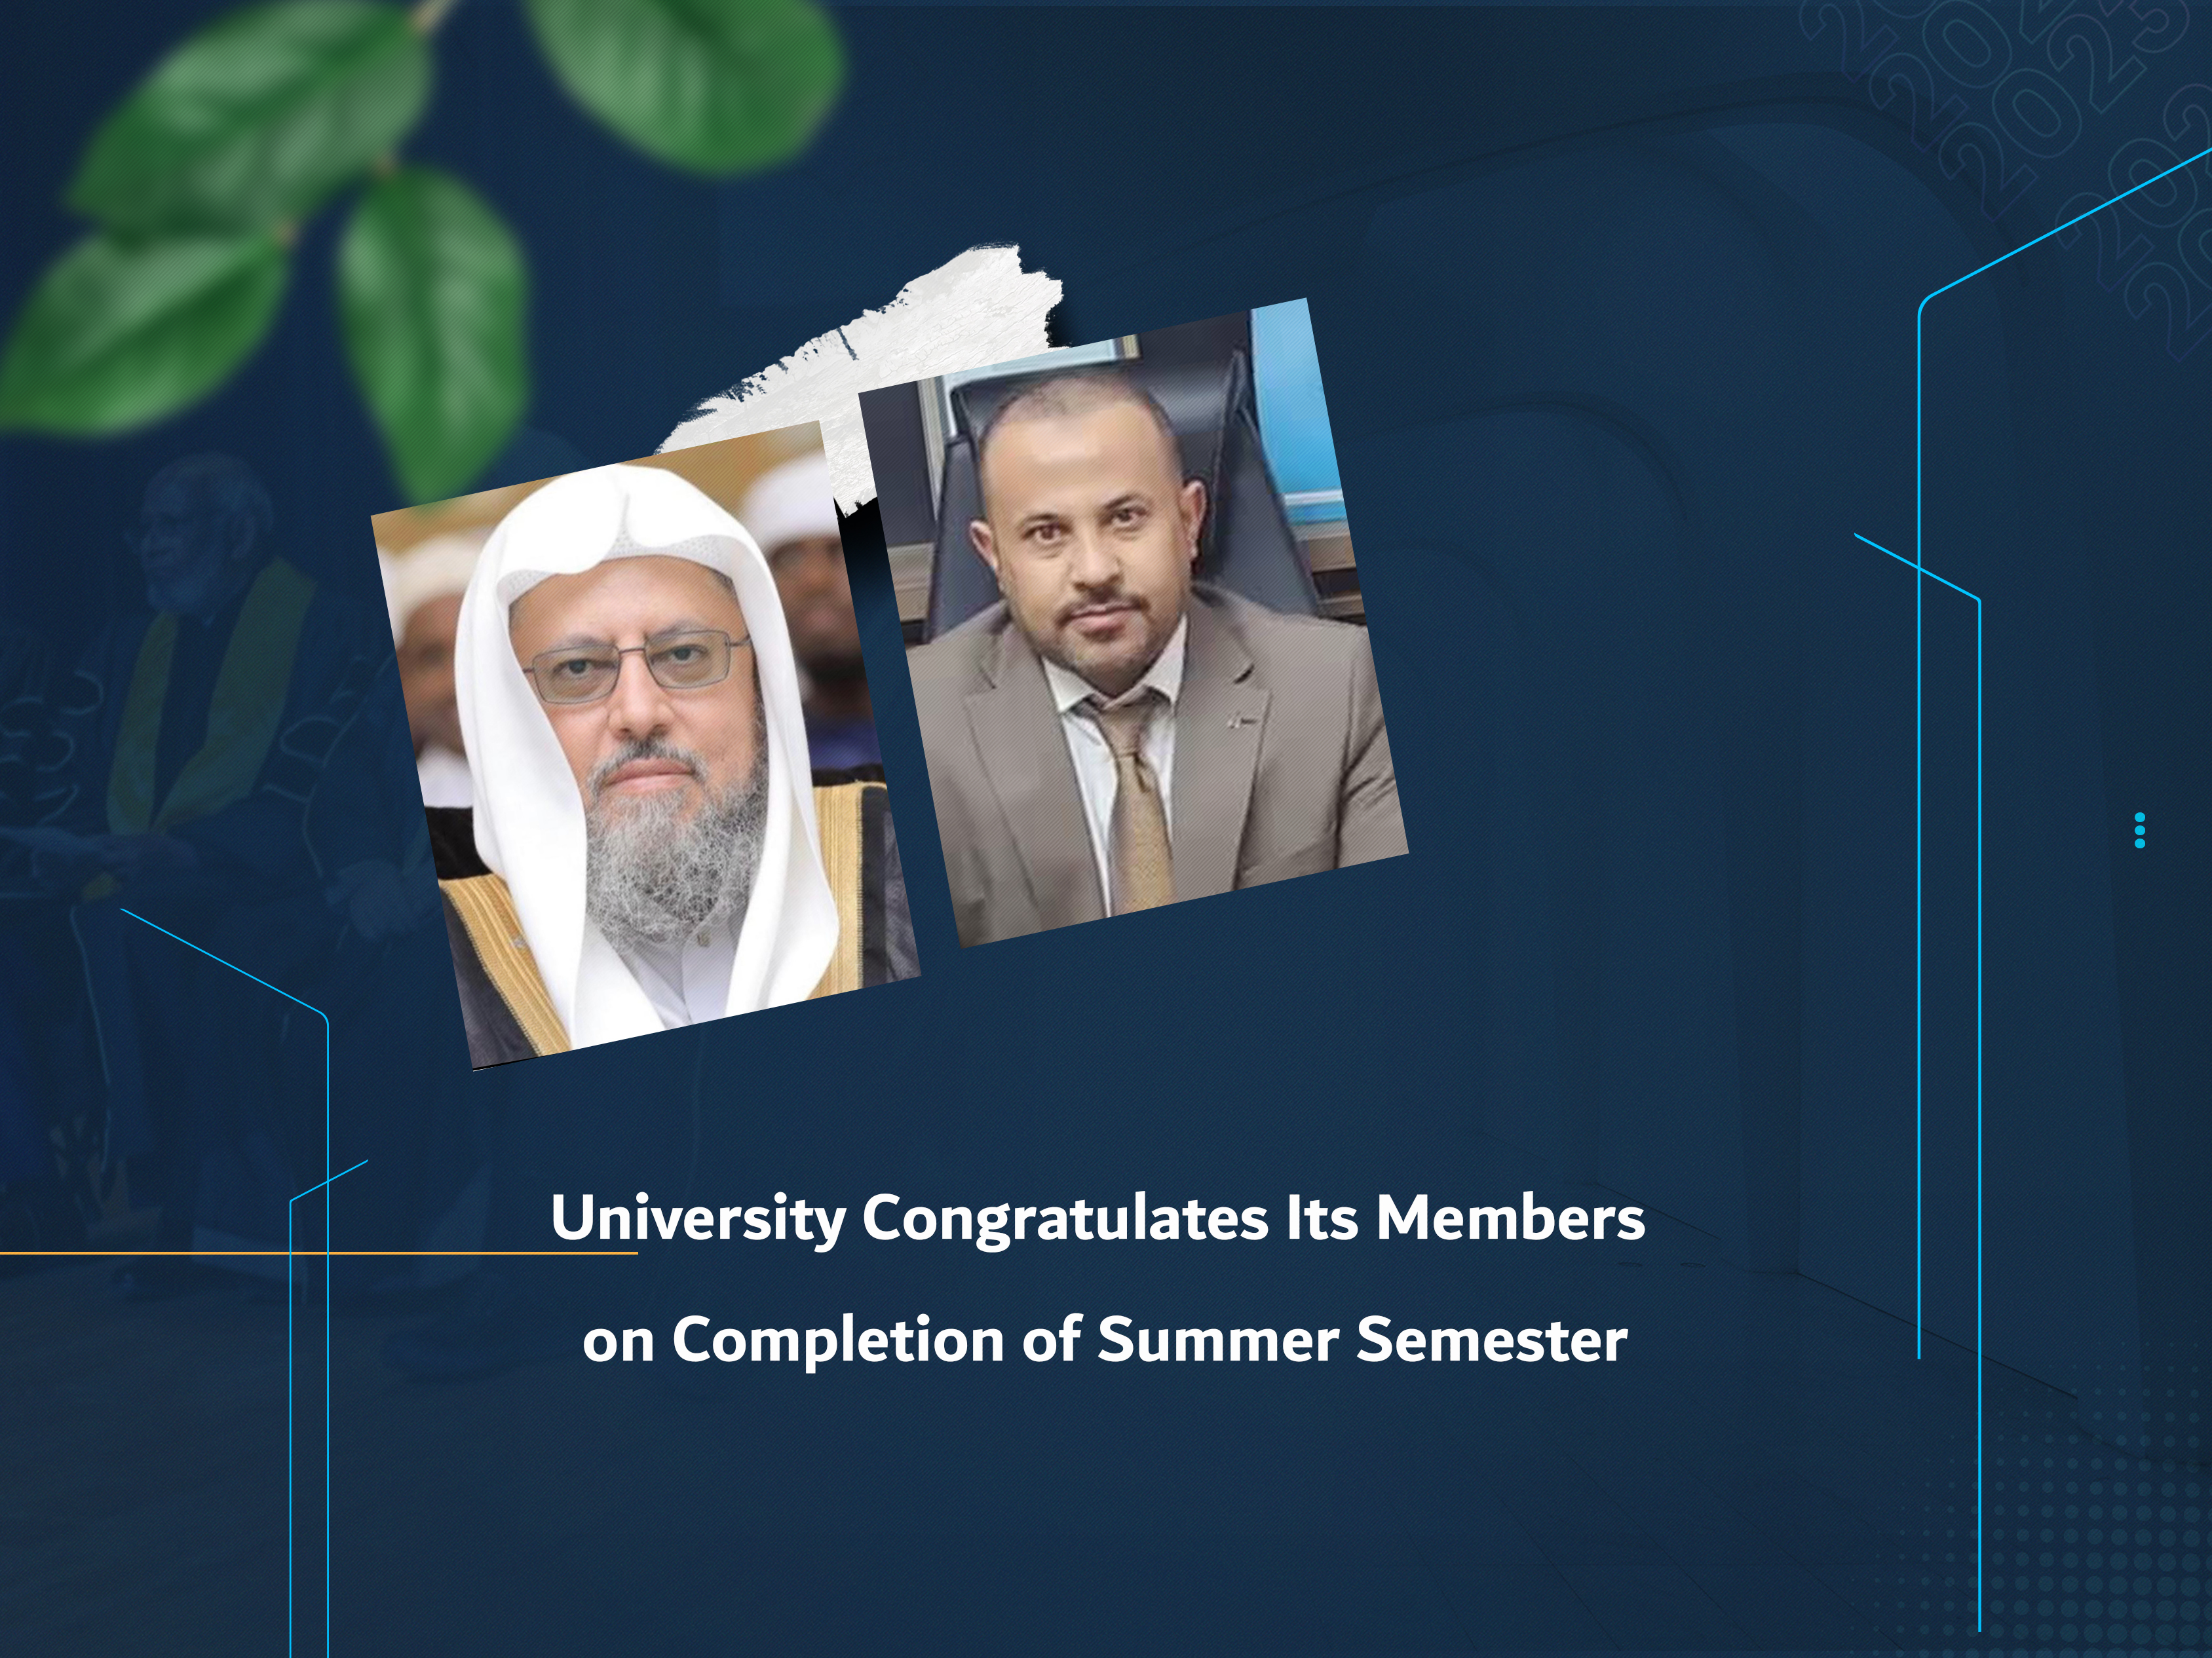 University Congratulates Its Members on Completion of Summer Semester